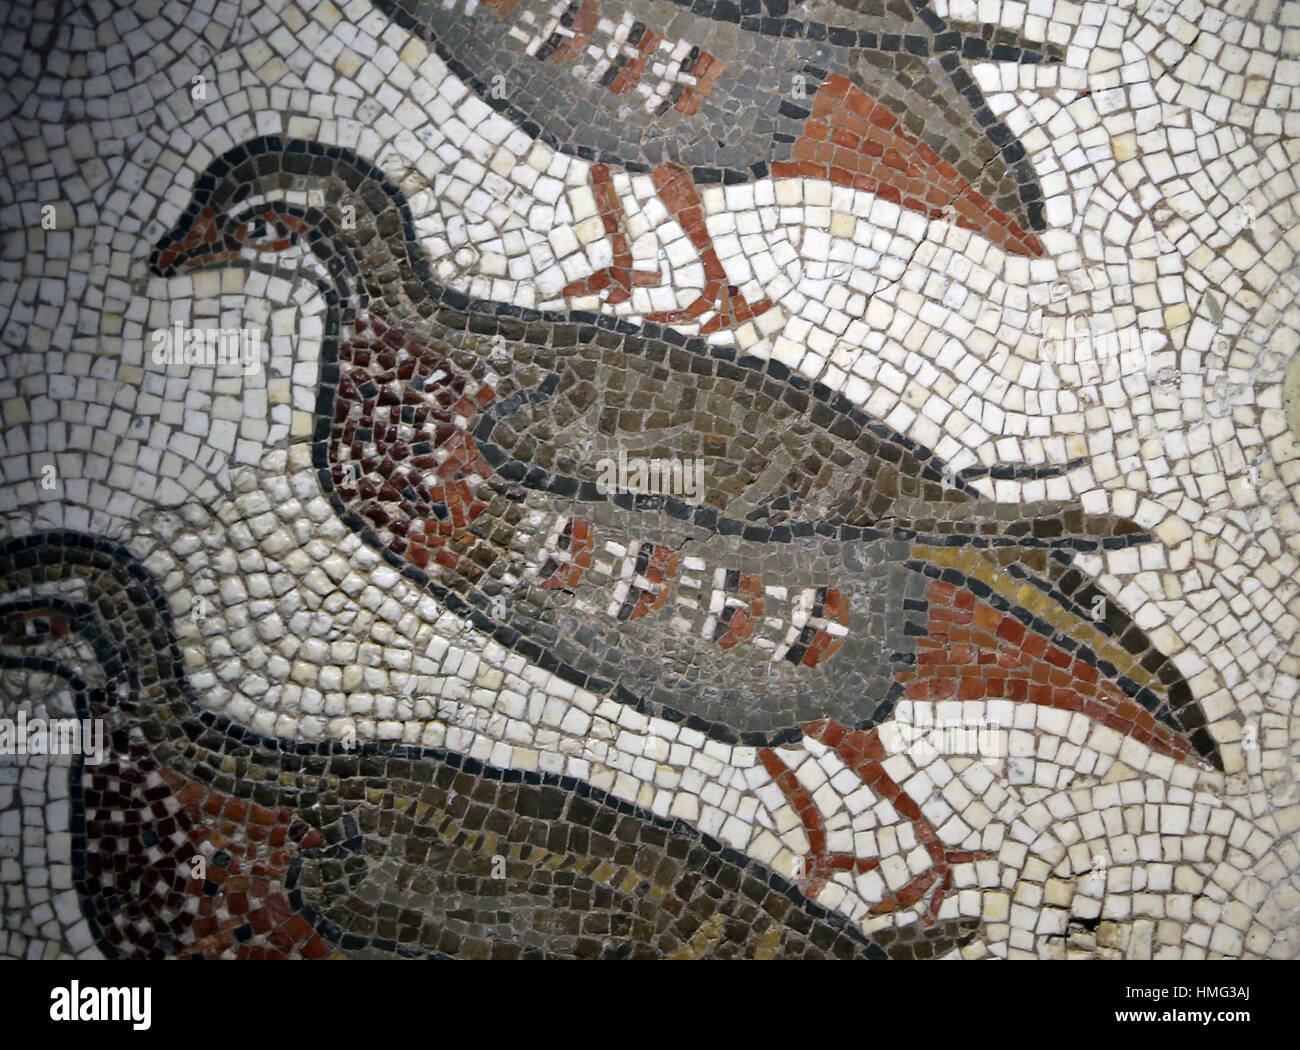 Mosaic with partridges. Roman. Limestone and marble. 4th century. Quintana del Marco, Leon. Spain. National Archaeological Museum, Madrid. Spain. Stock Photo